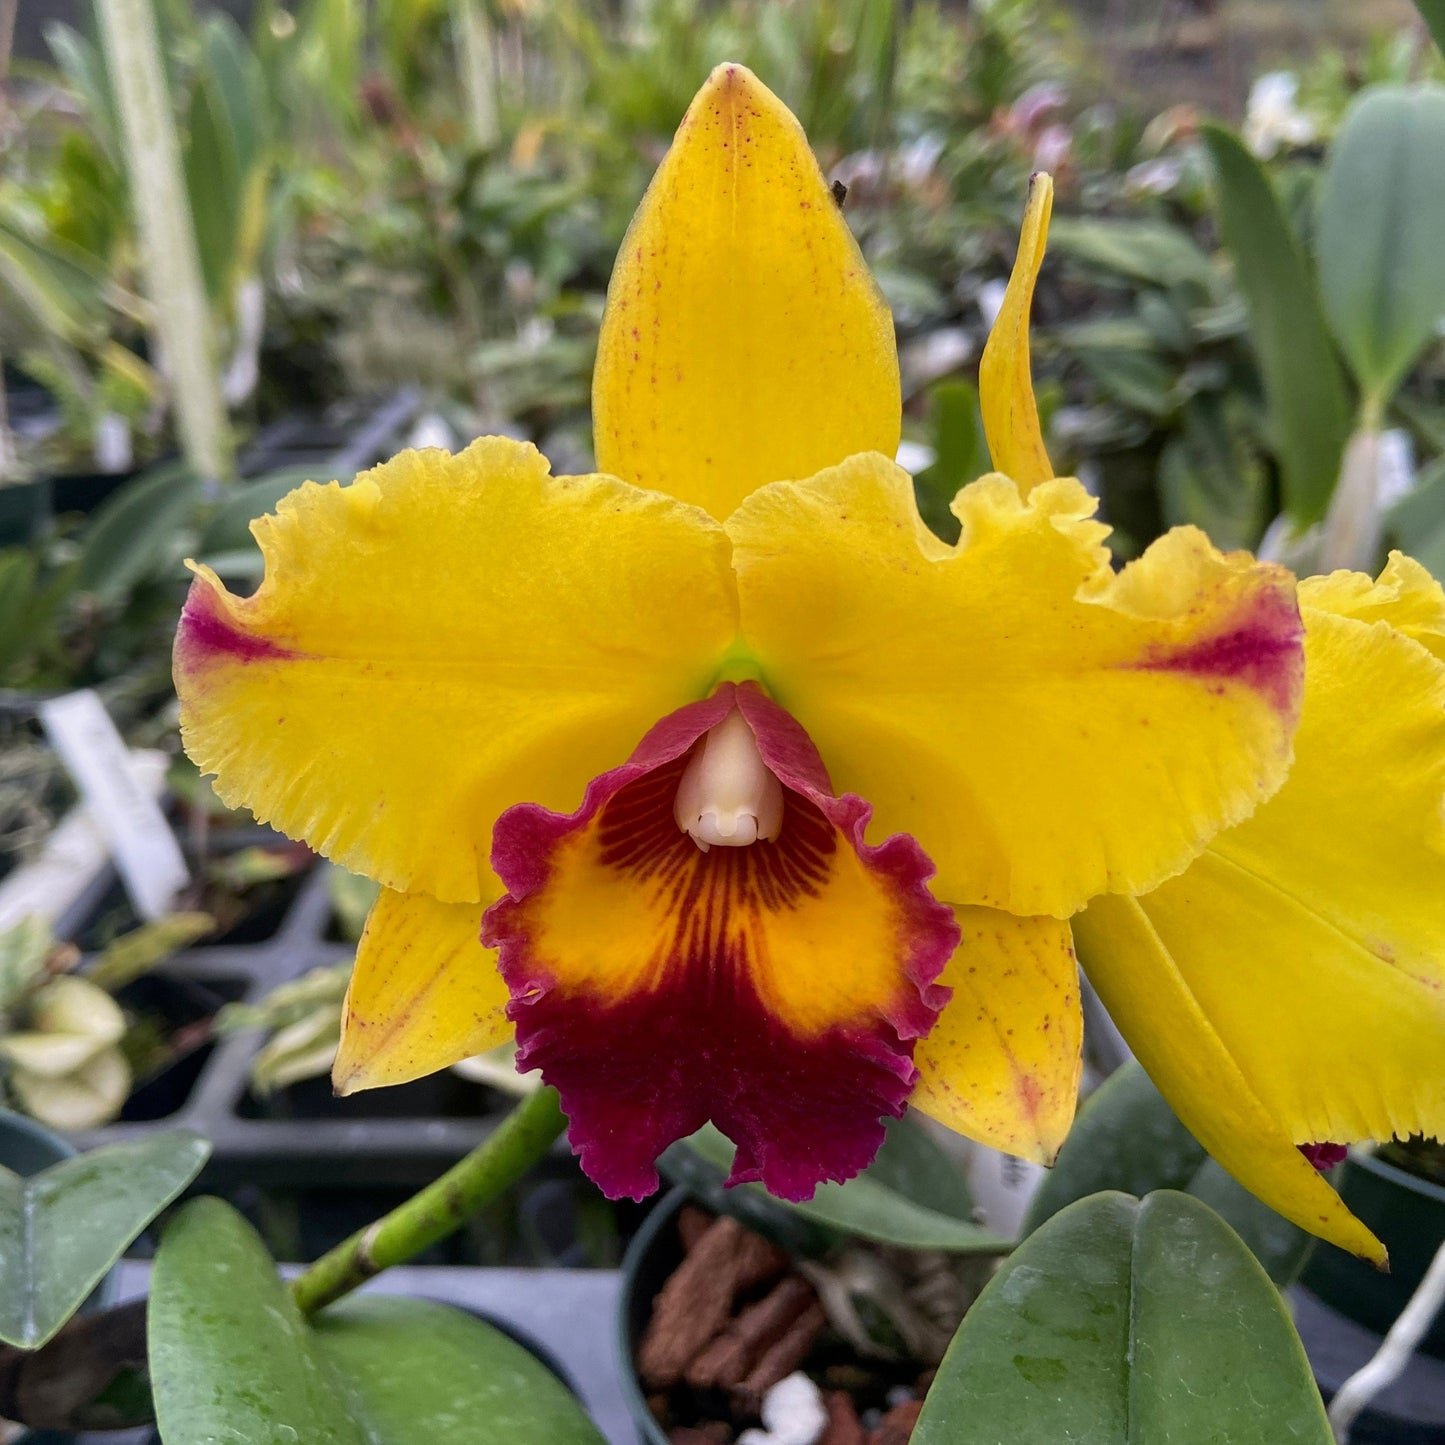 Big Cattleya flower with ruffled yellow petals and a red lip